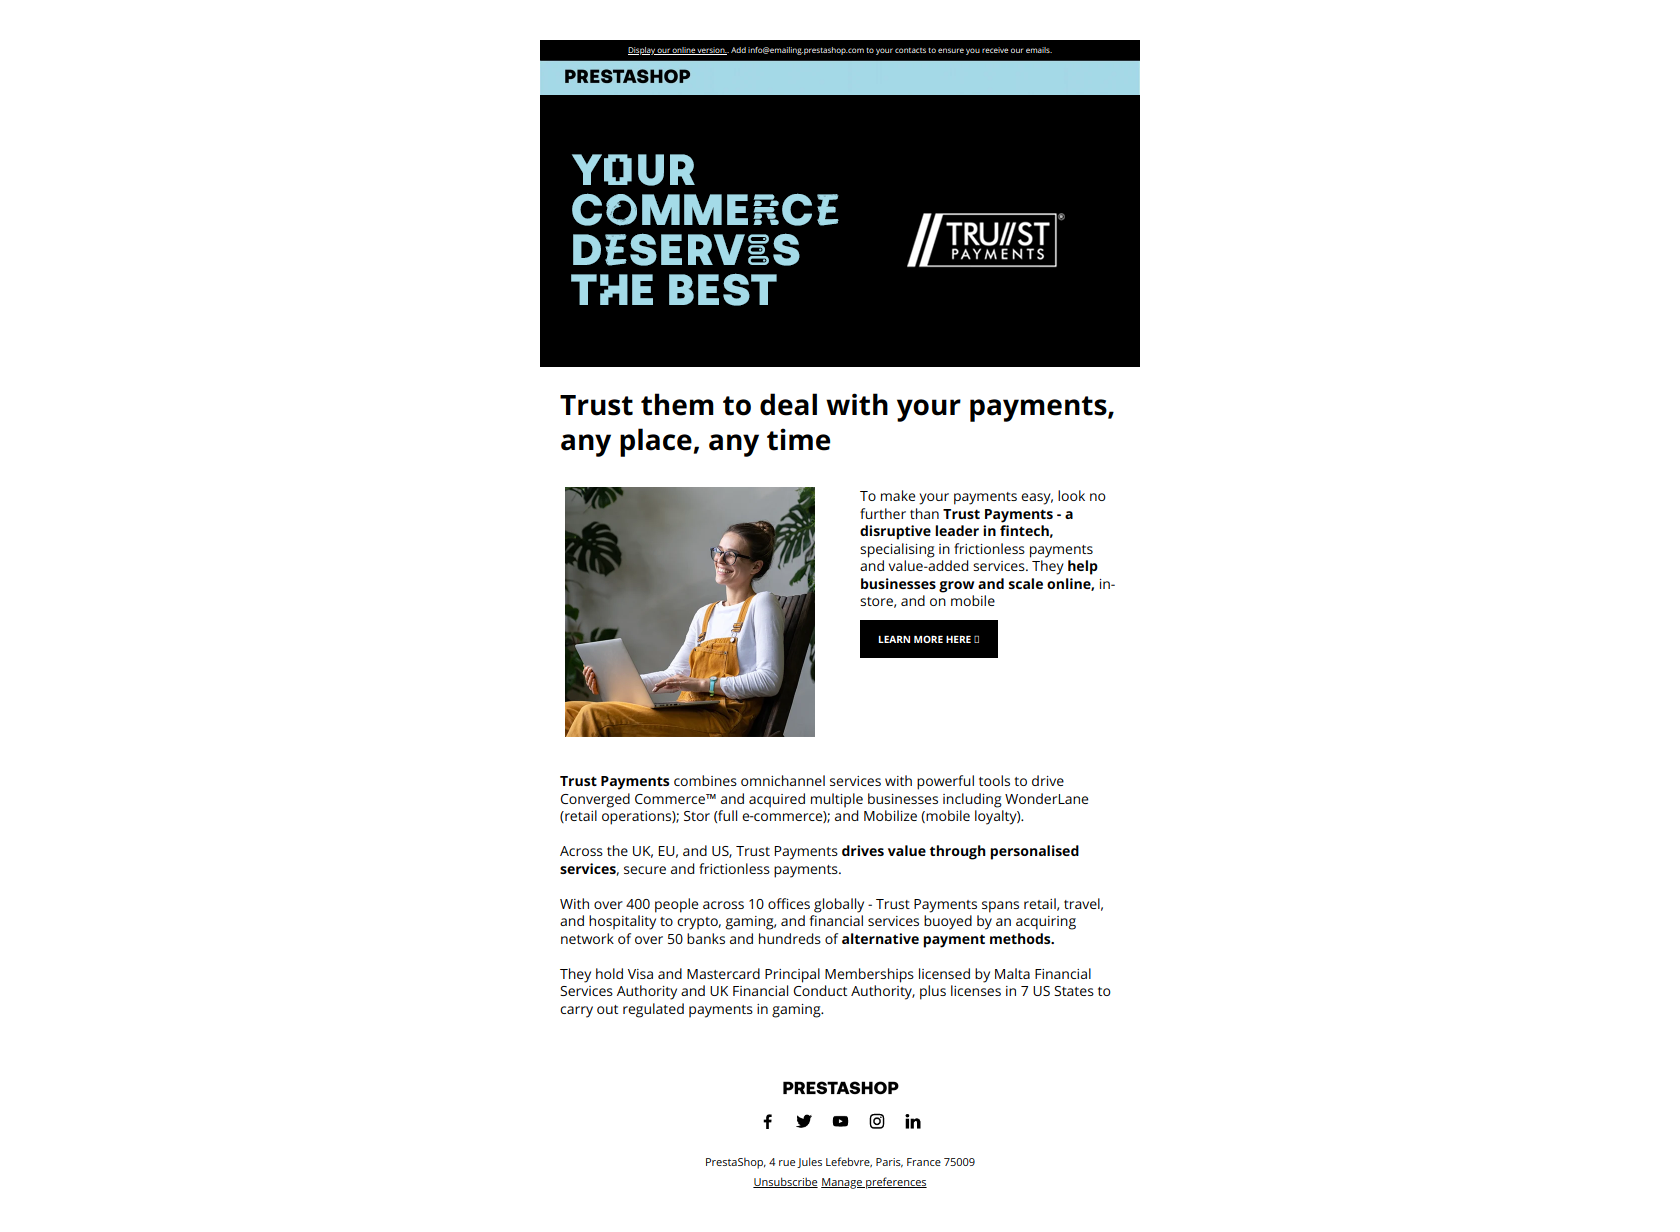 Trust Payments: They make payments easy